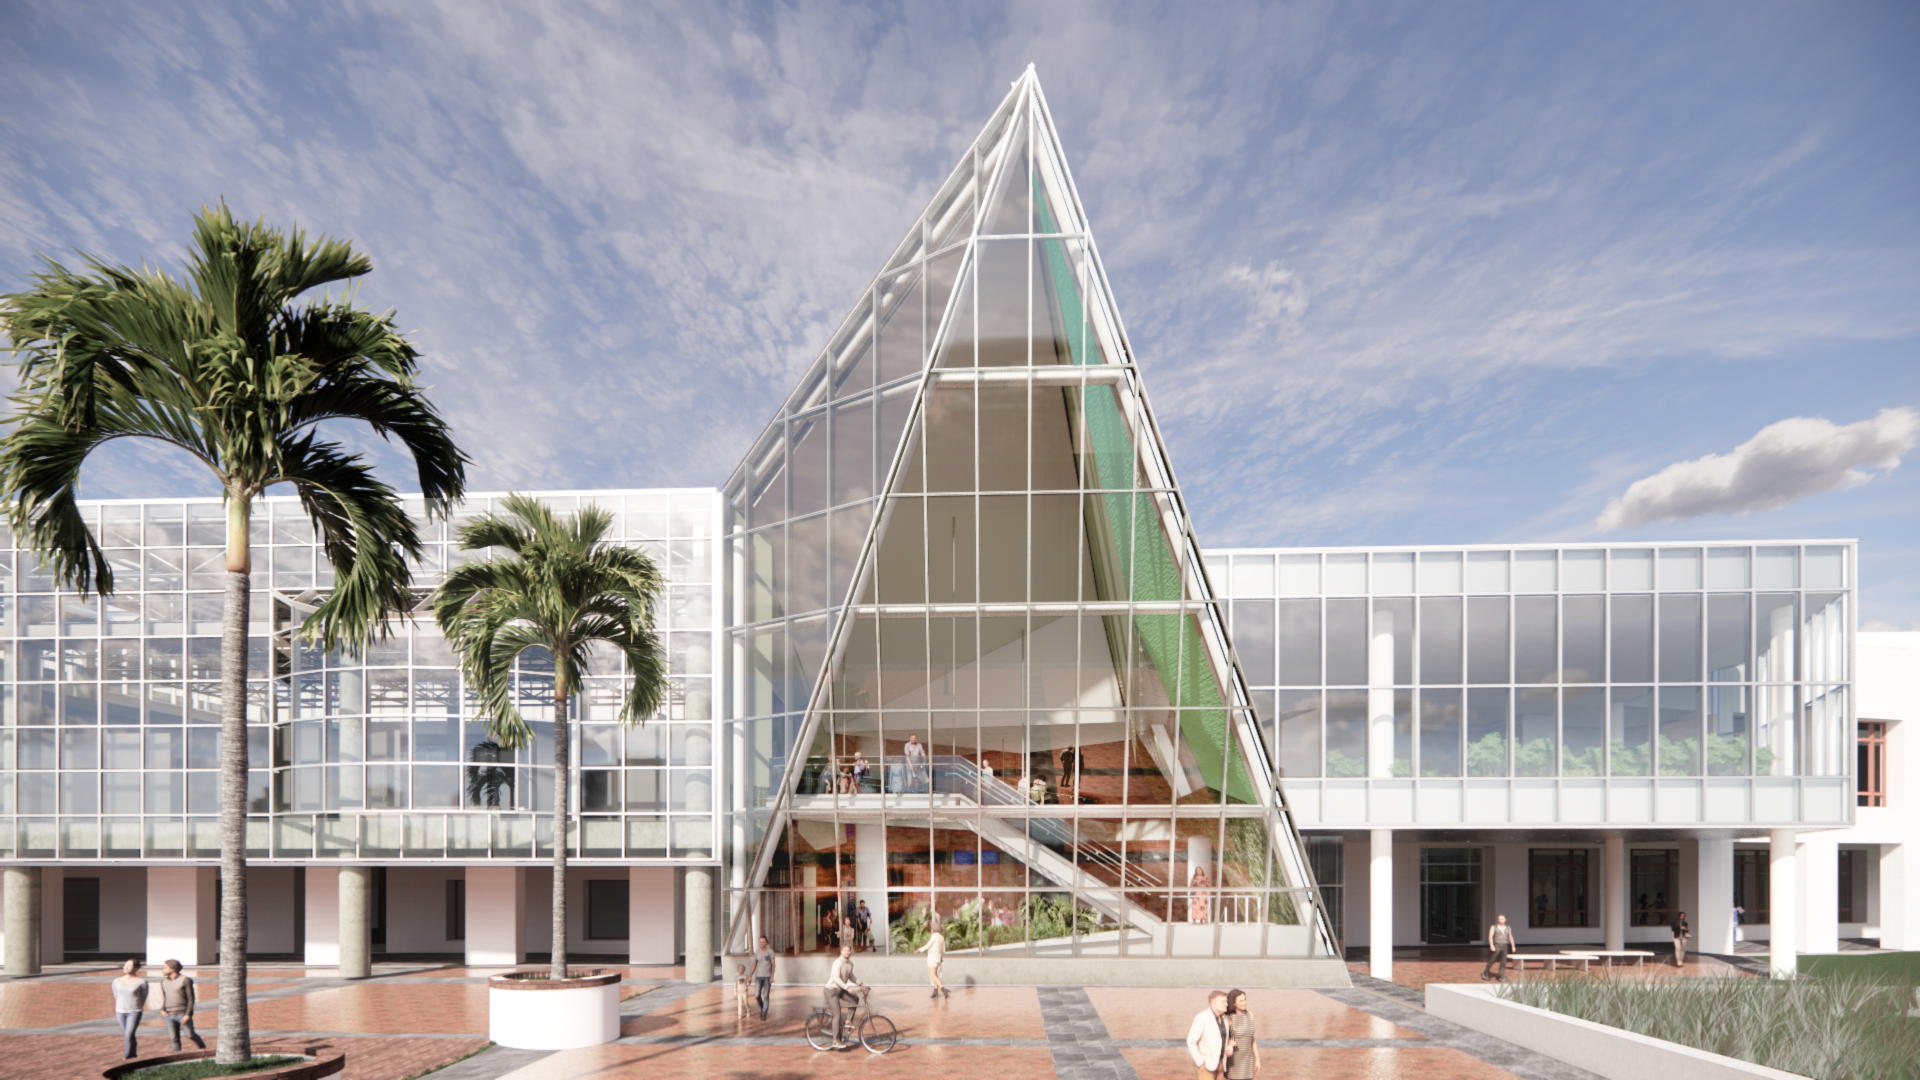 The rendering shows a glass facade of the new lobby to the Audubon Aquarium and Audubon Insectarium. It has a point that juts out above the two-story building. In front of the building are palm trees and a paved walking area.